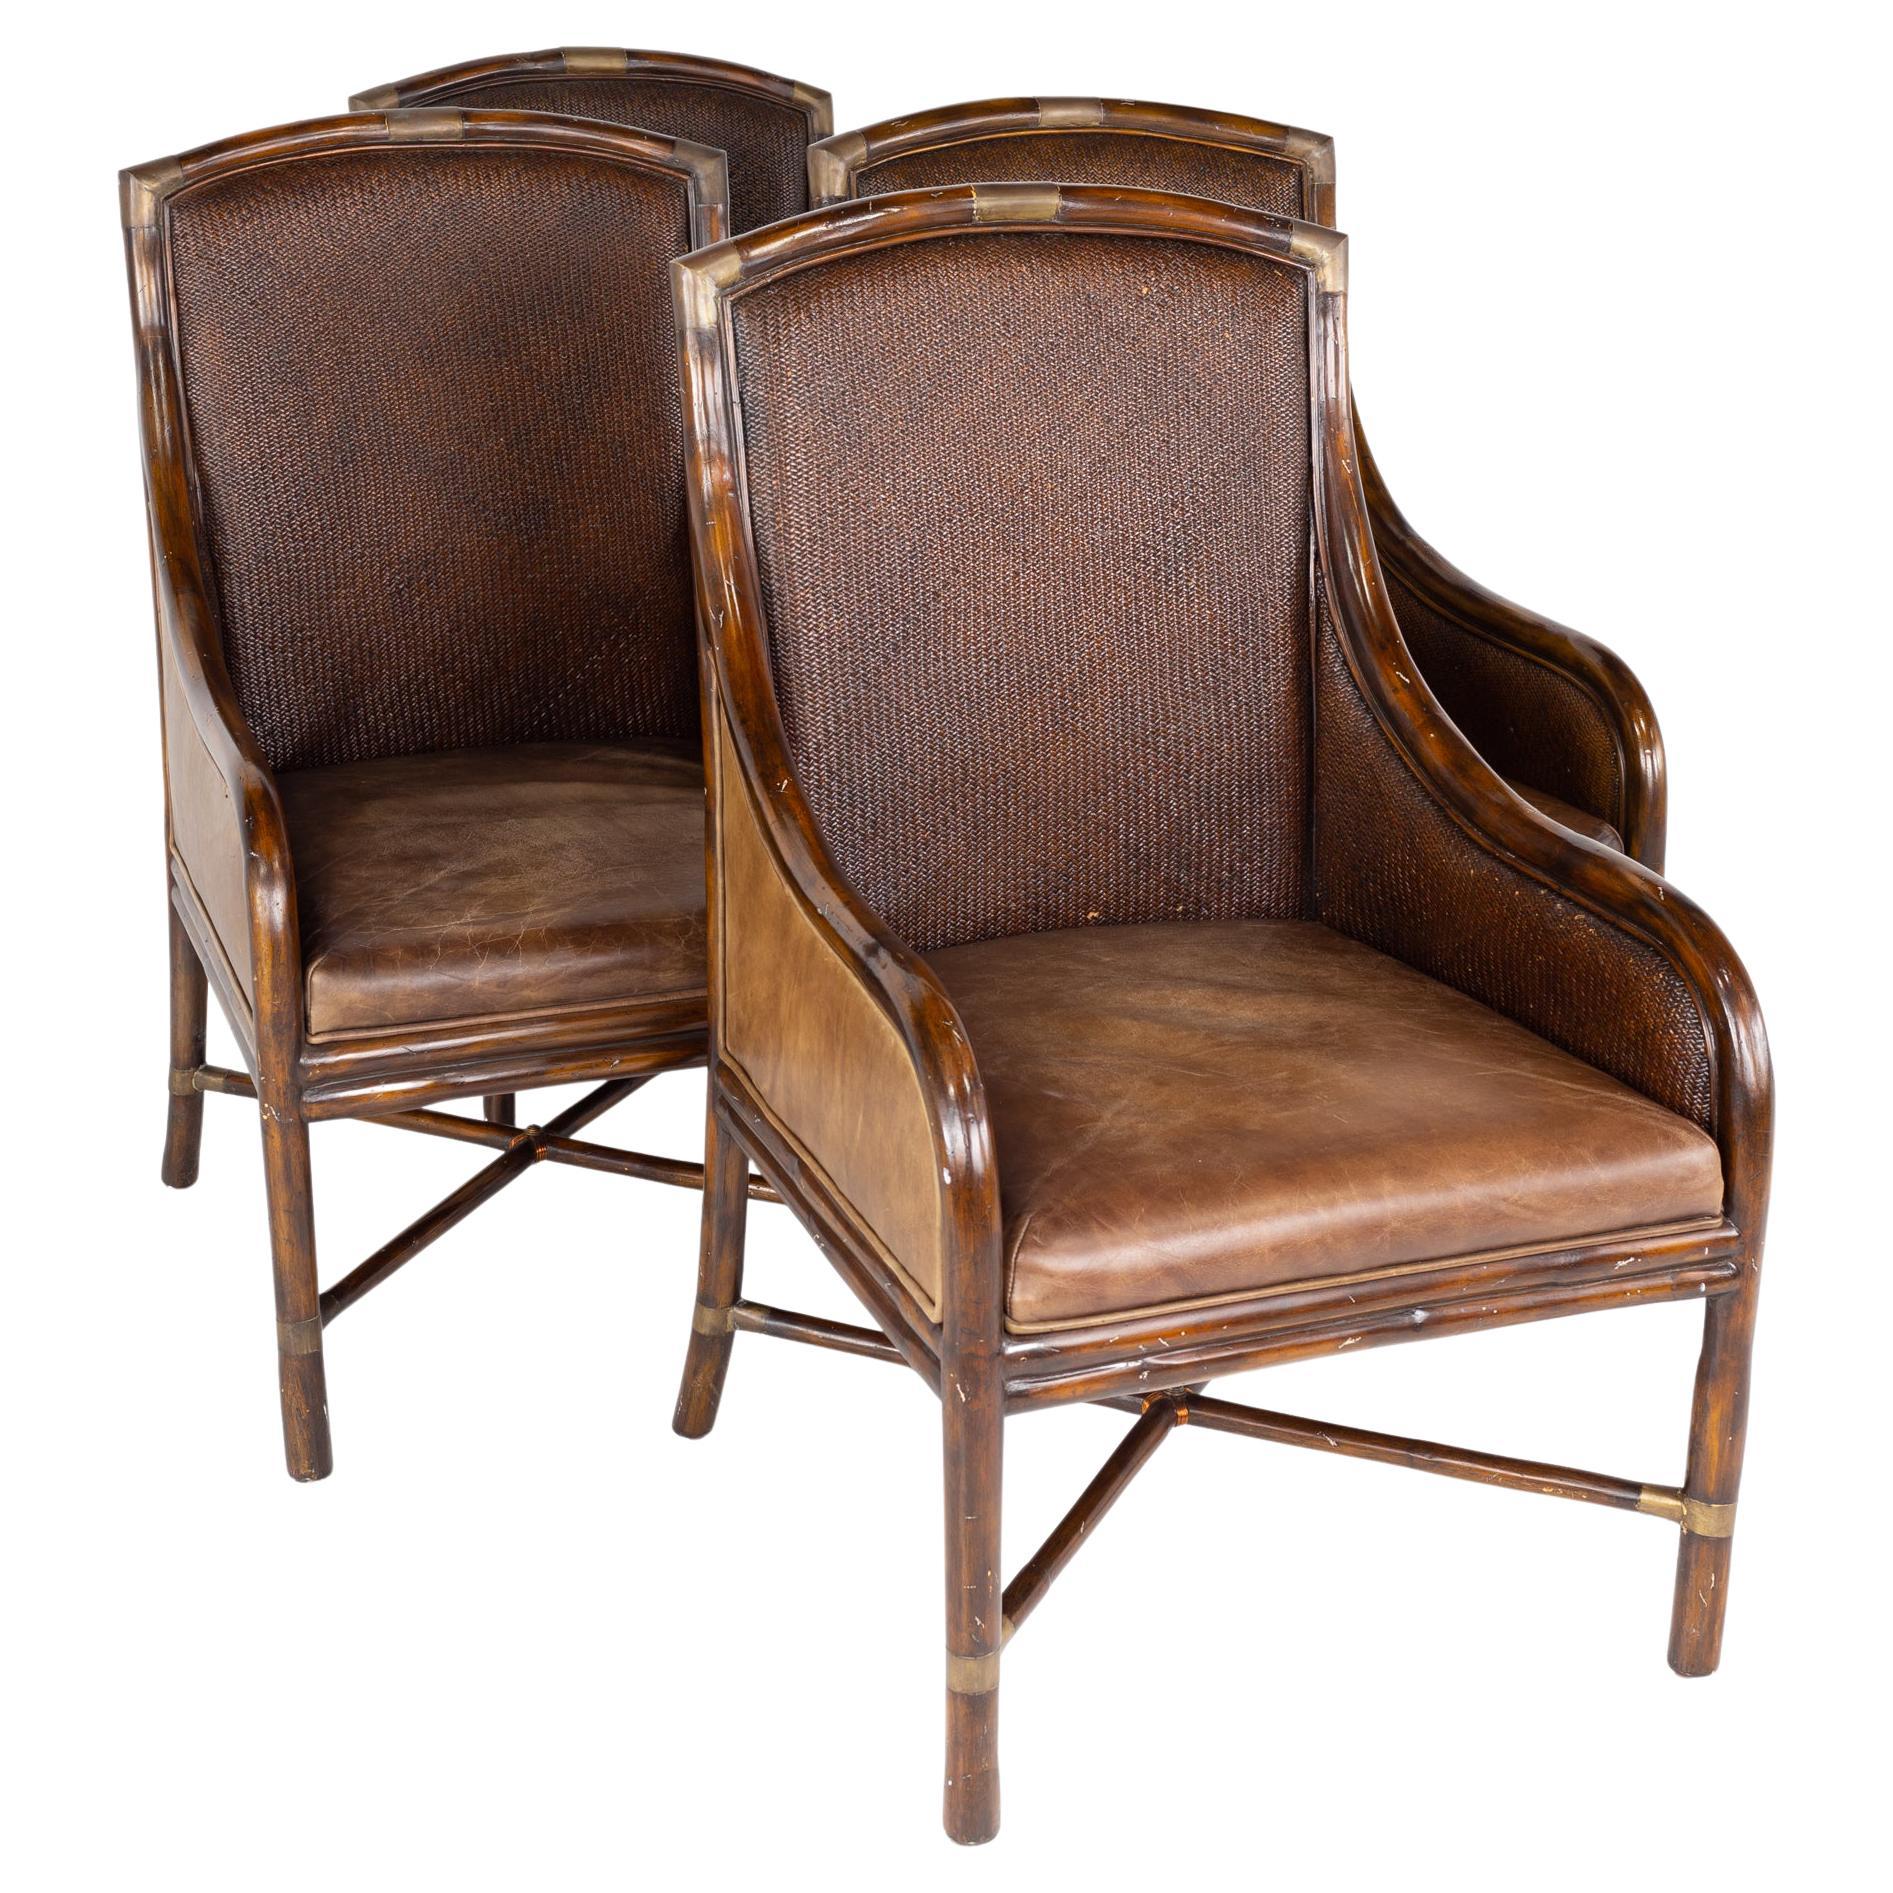 Maitland Smith Rattan and Leather Armchairs, Set of 4